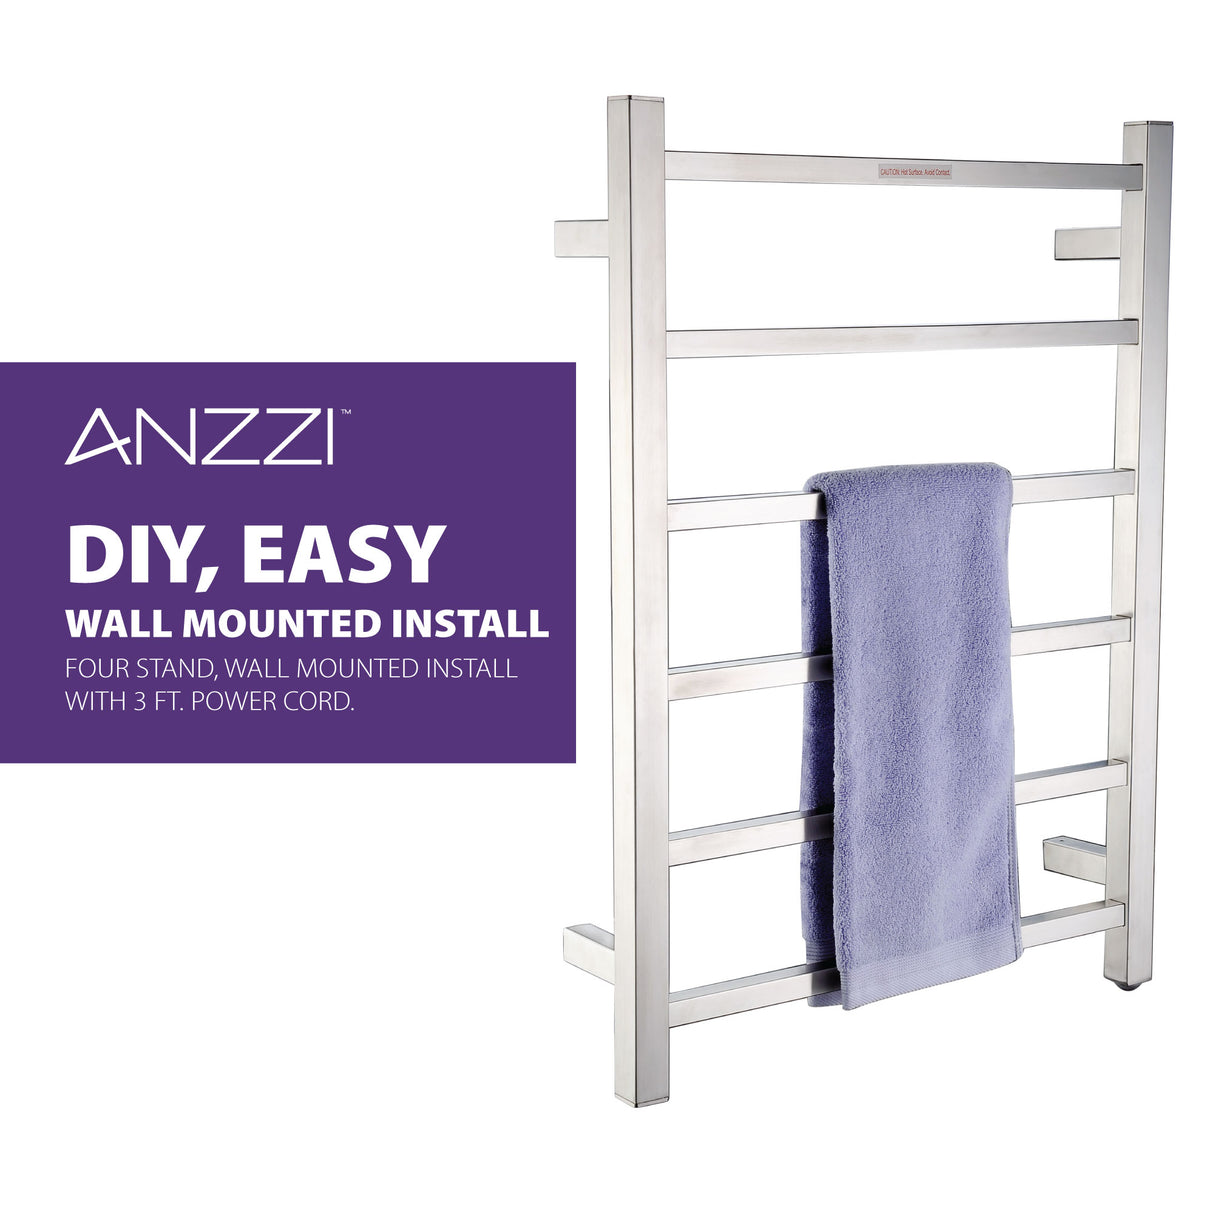 ANZZI TW-AZ014BN Charles Series 6-Bar Stainless Steel Wall Mounted Electric Towel Warmer Rack in Brushed Nickel